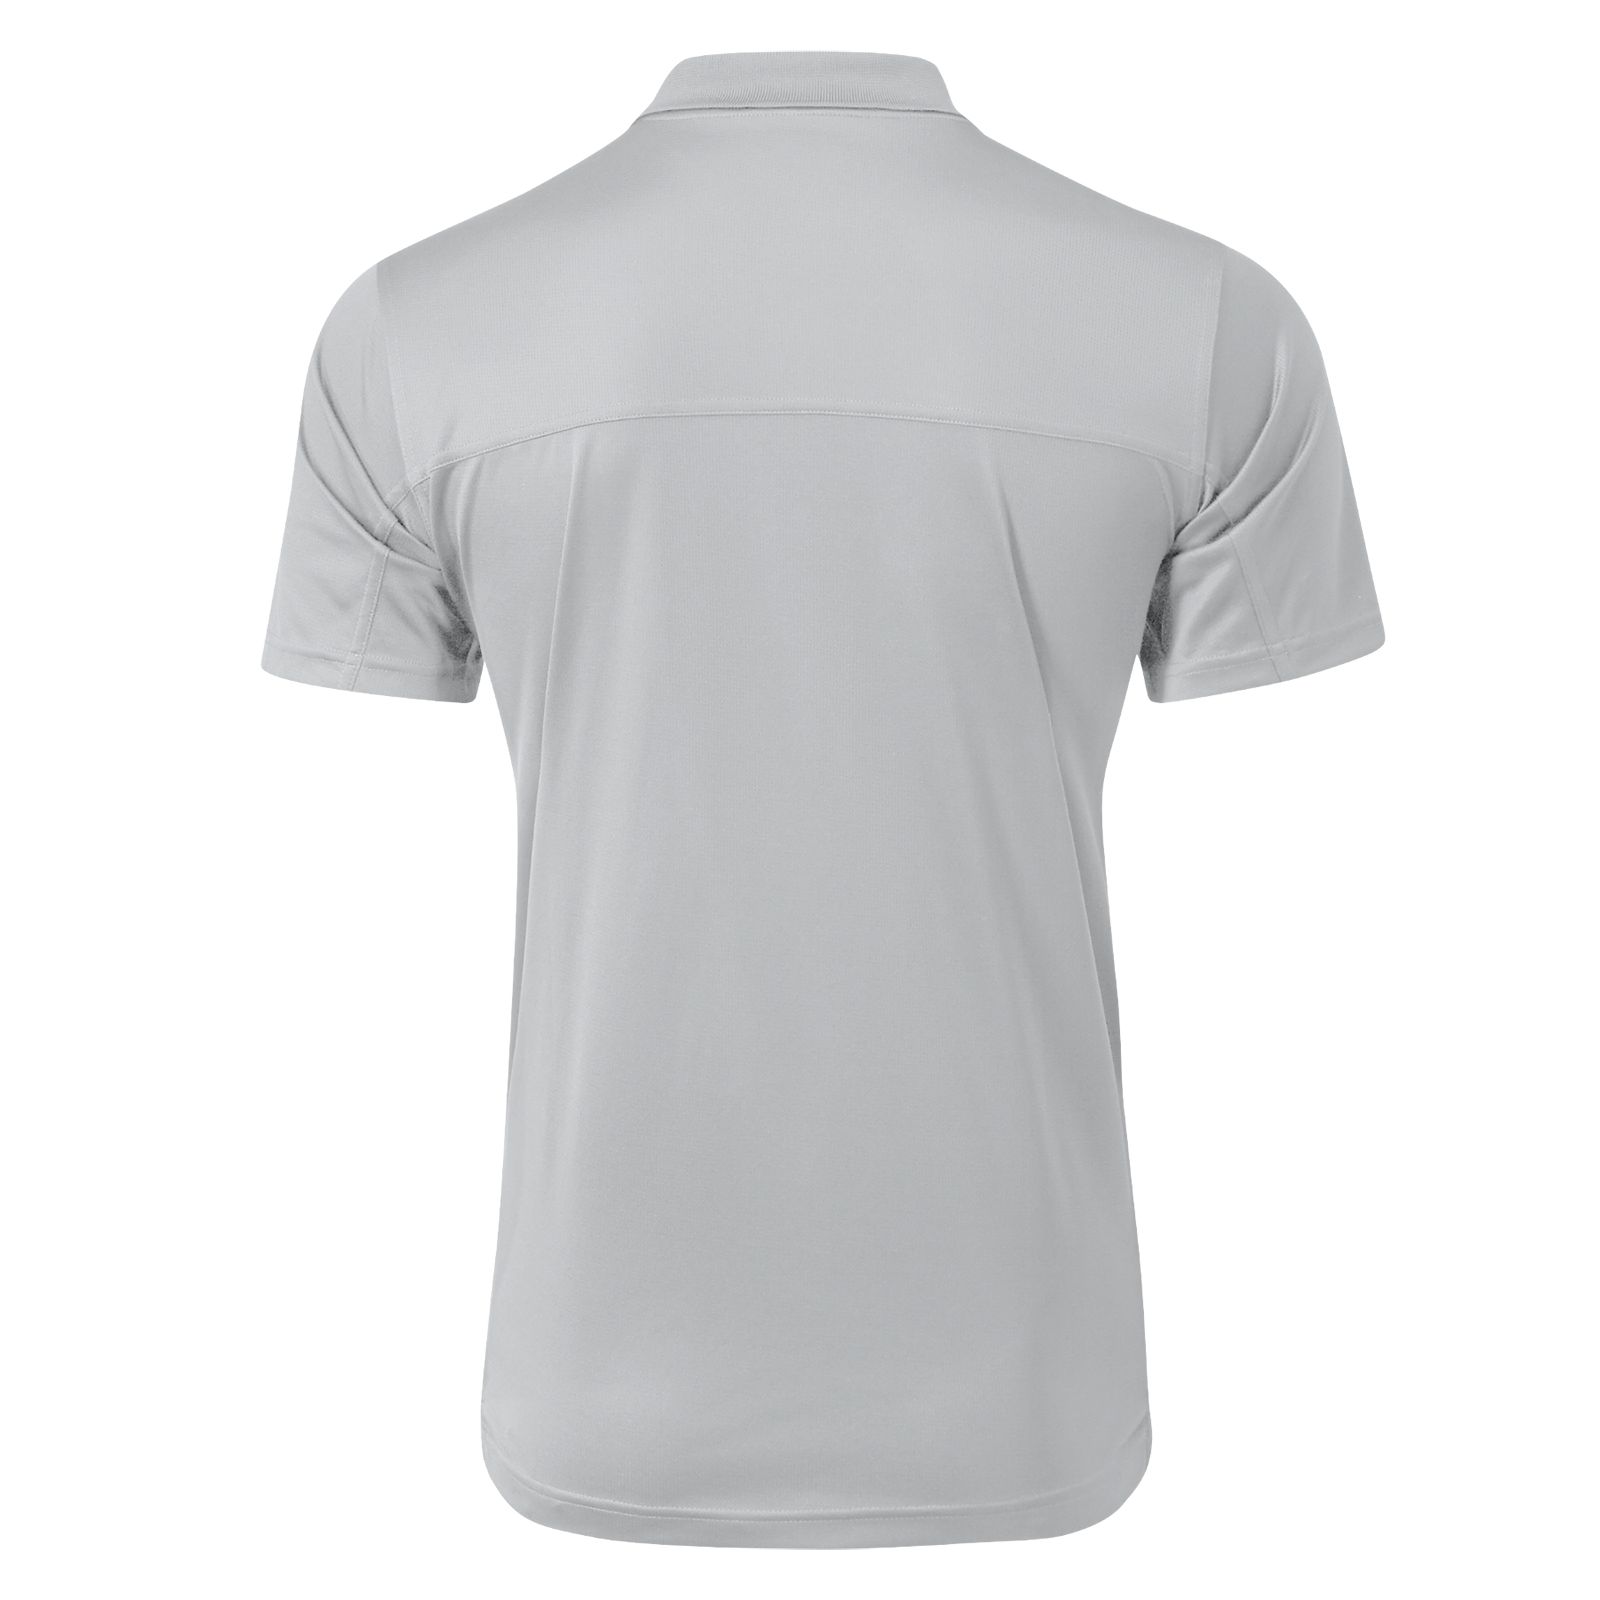 Men's Performance Tech Polo, Light Grey image number 2